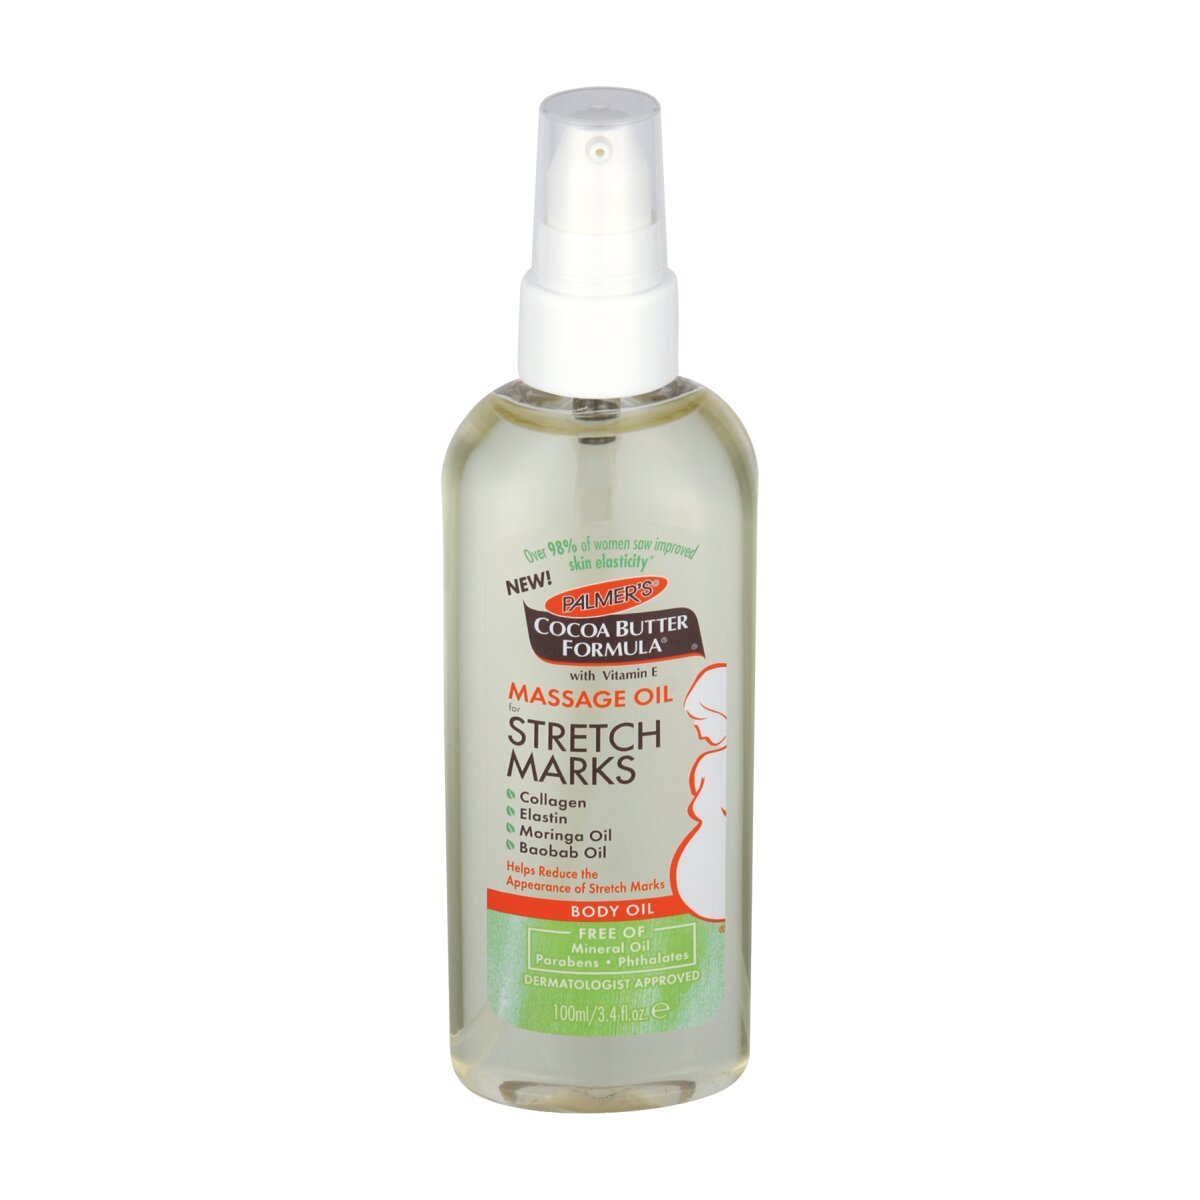 Massage Oil For Stretch Marks - 328254